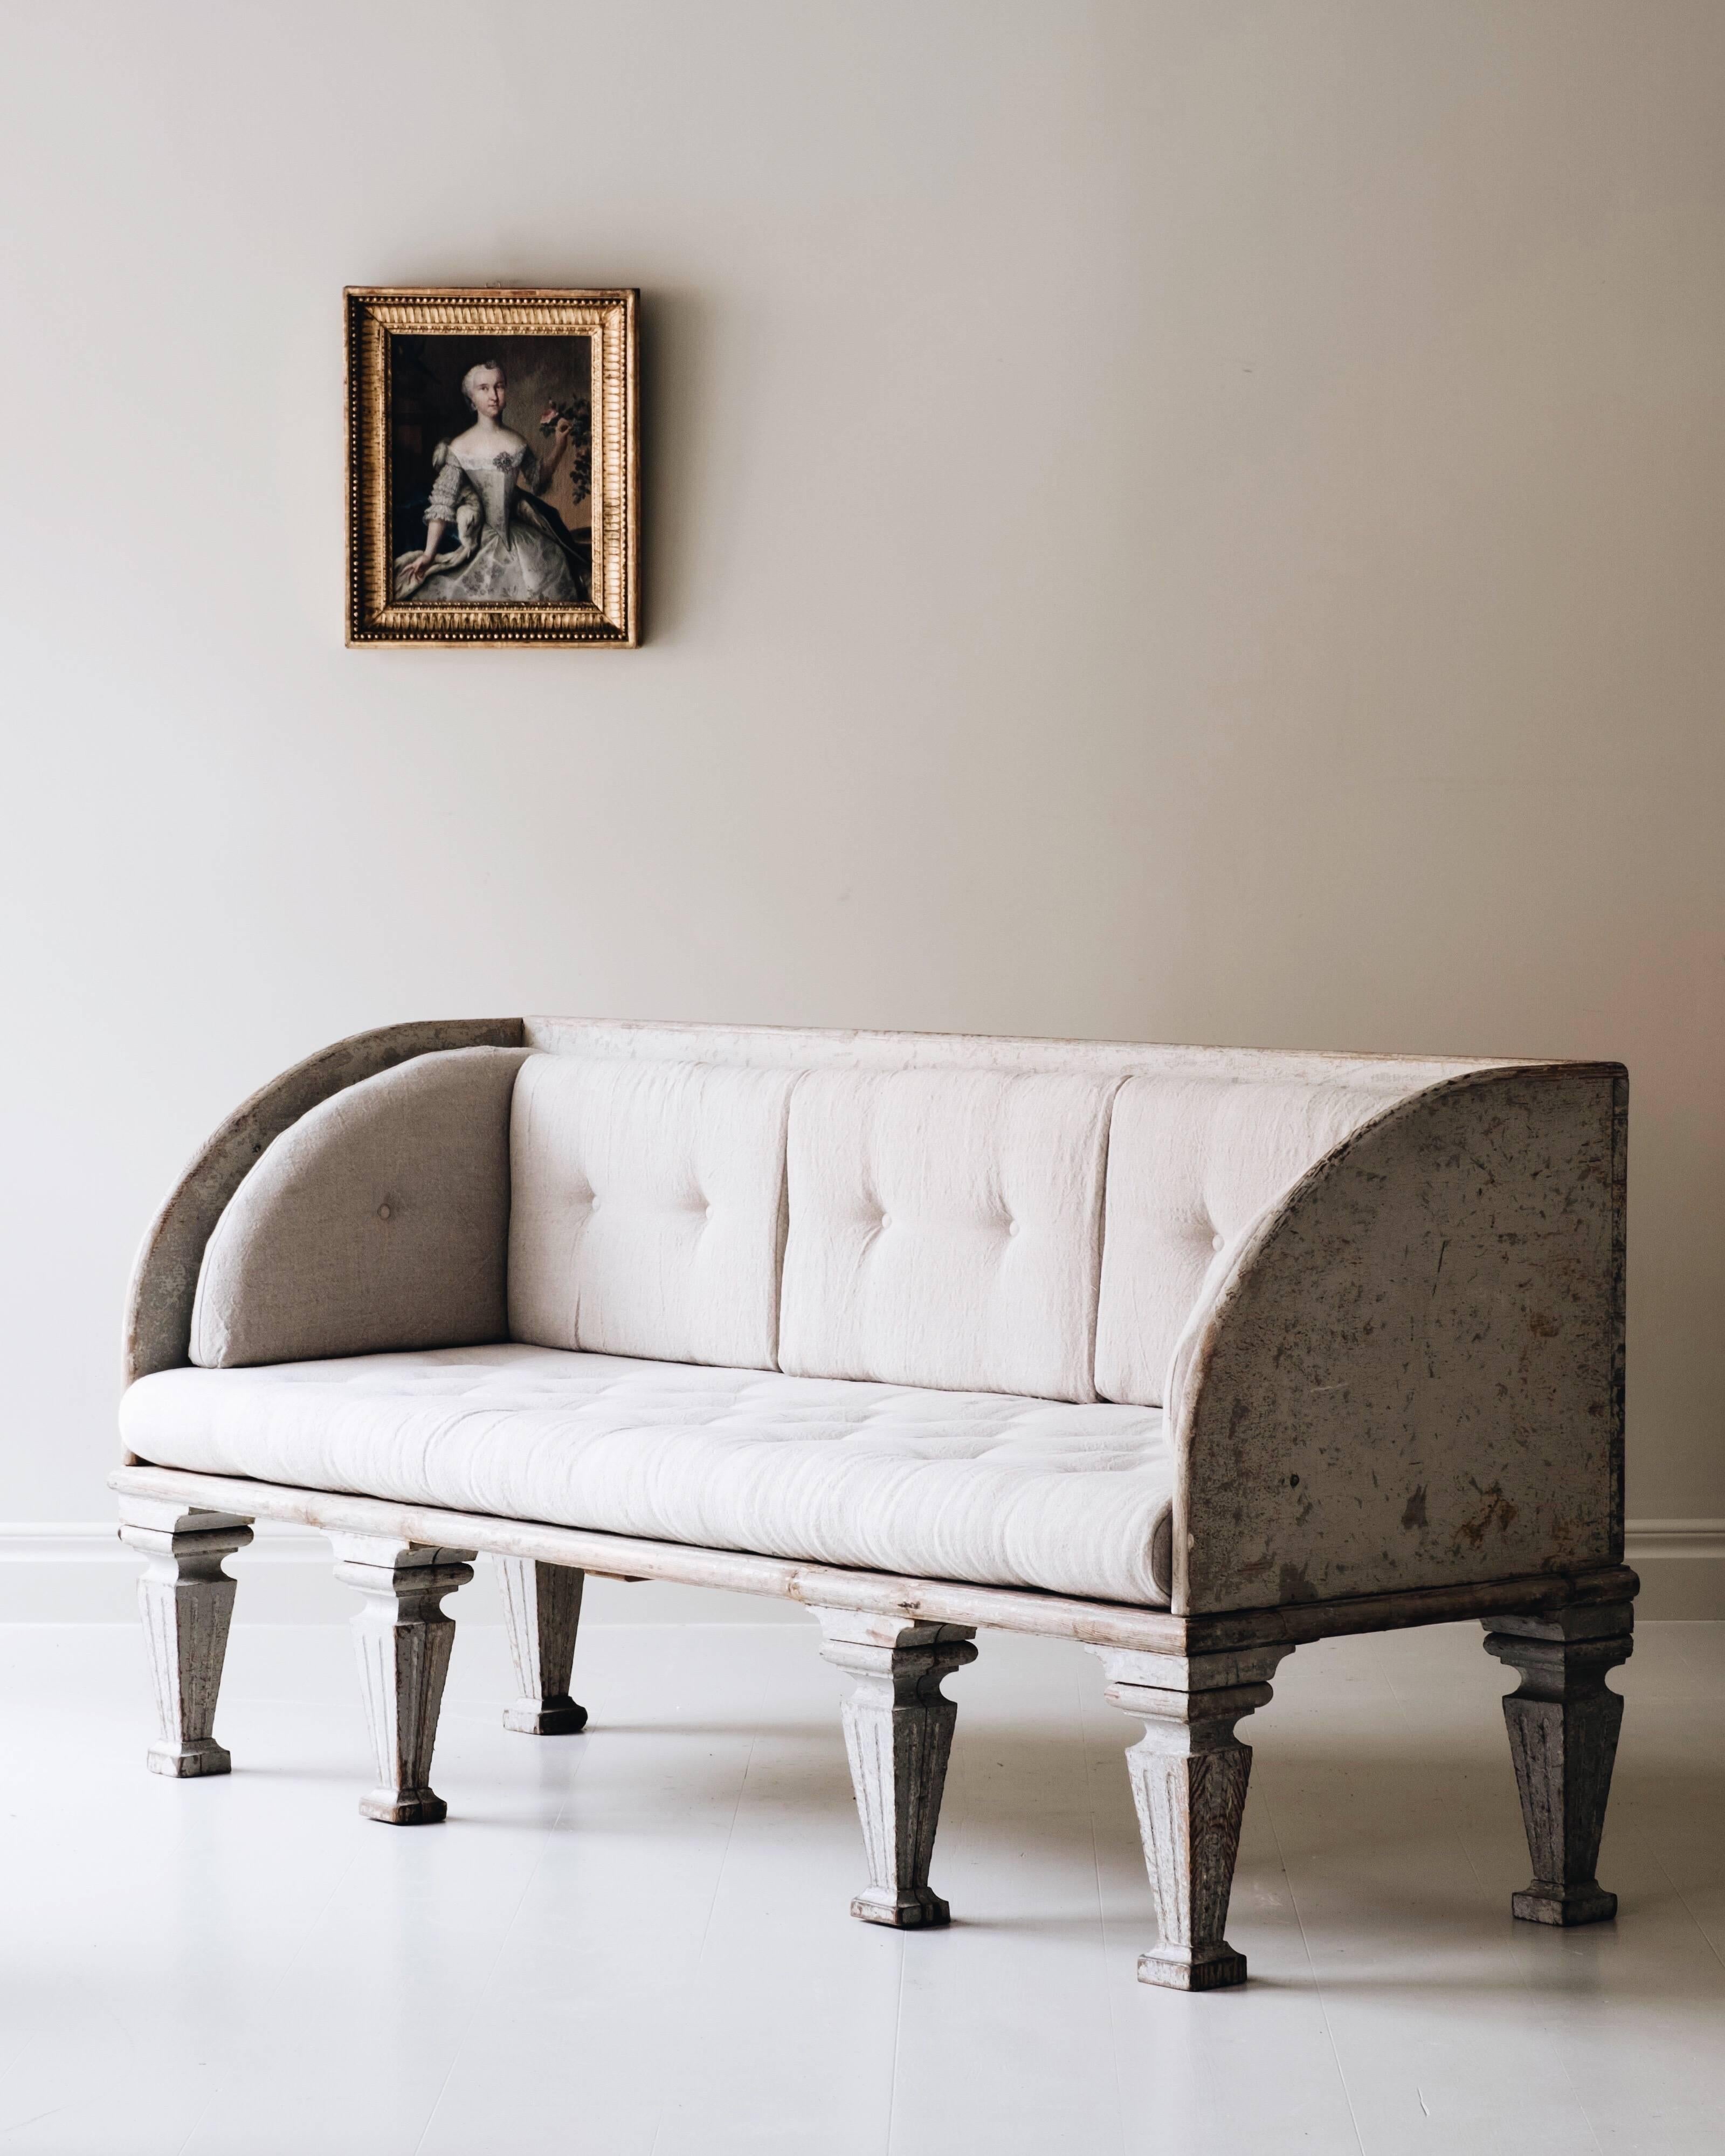 Remarkable and most unusual Swedish 19th century Gustavian sofa in original color, circa 1810.

During a short period, 1800-1810 some furniture makers did furniture to look like they where made of stone like this sofa. Inspired by the Roman Empire